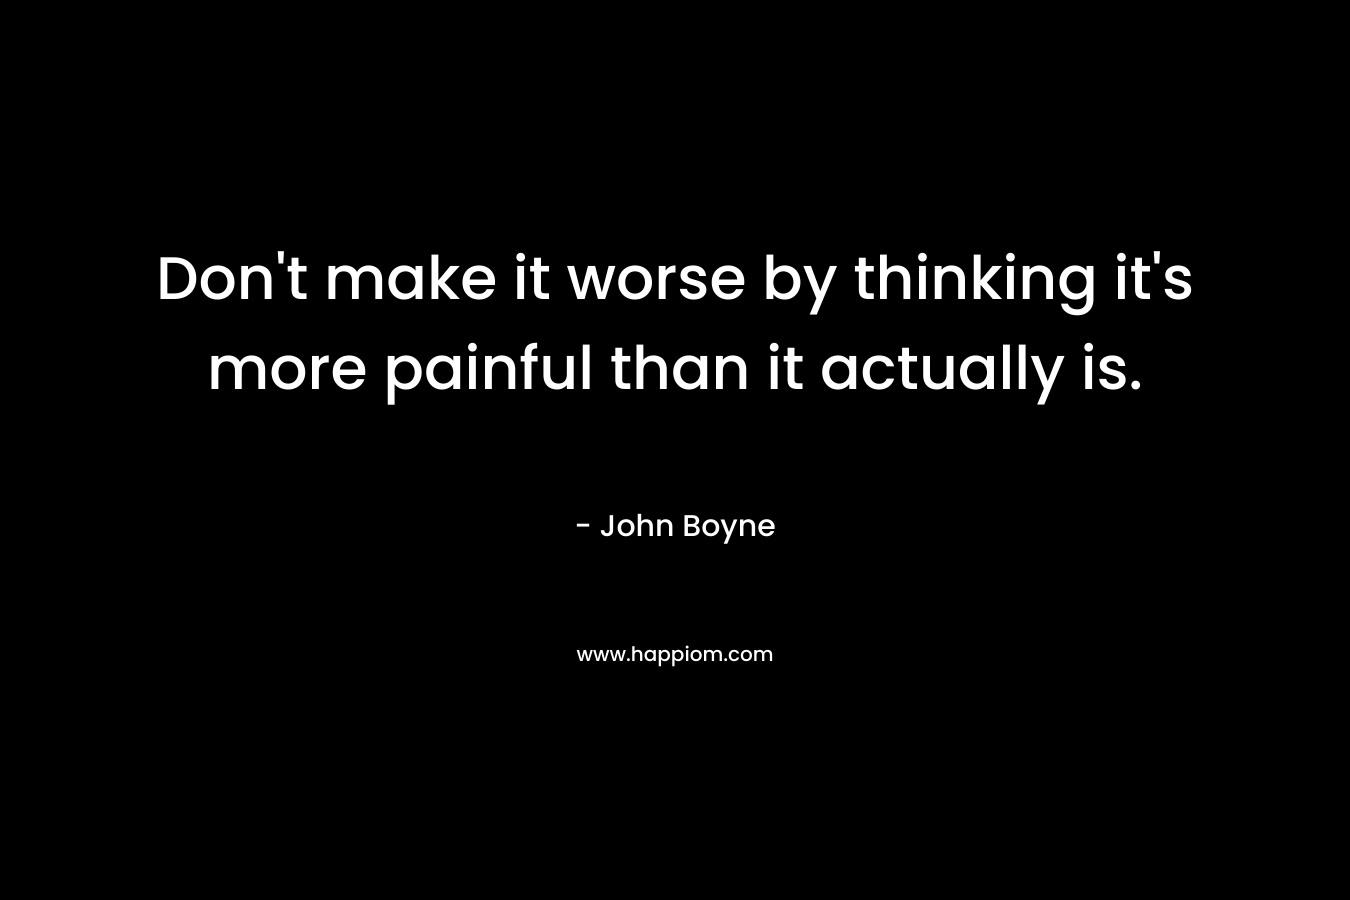 Don’t make it worse by thinking it’s more painful than it actually is. – John Boyne